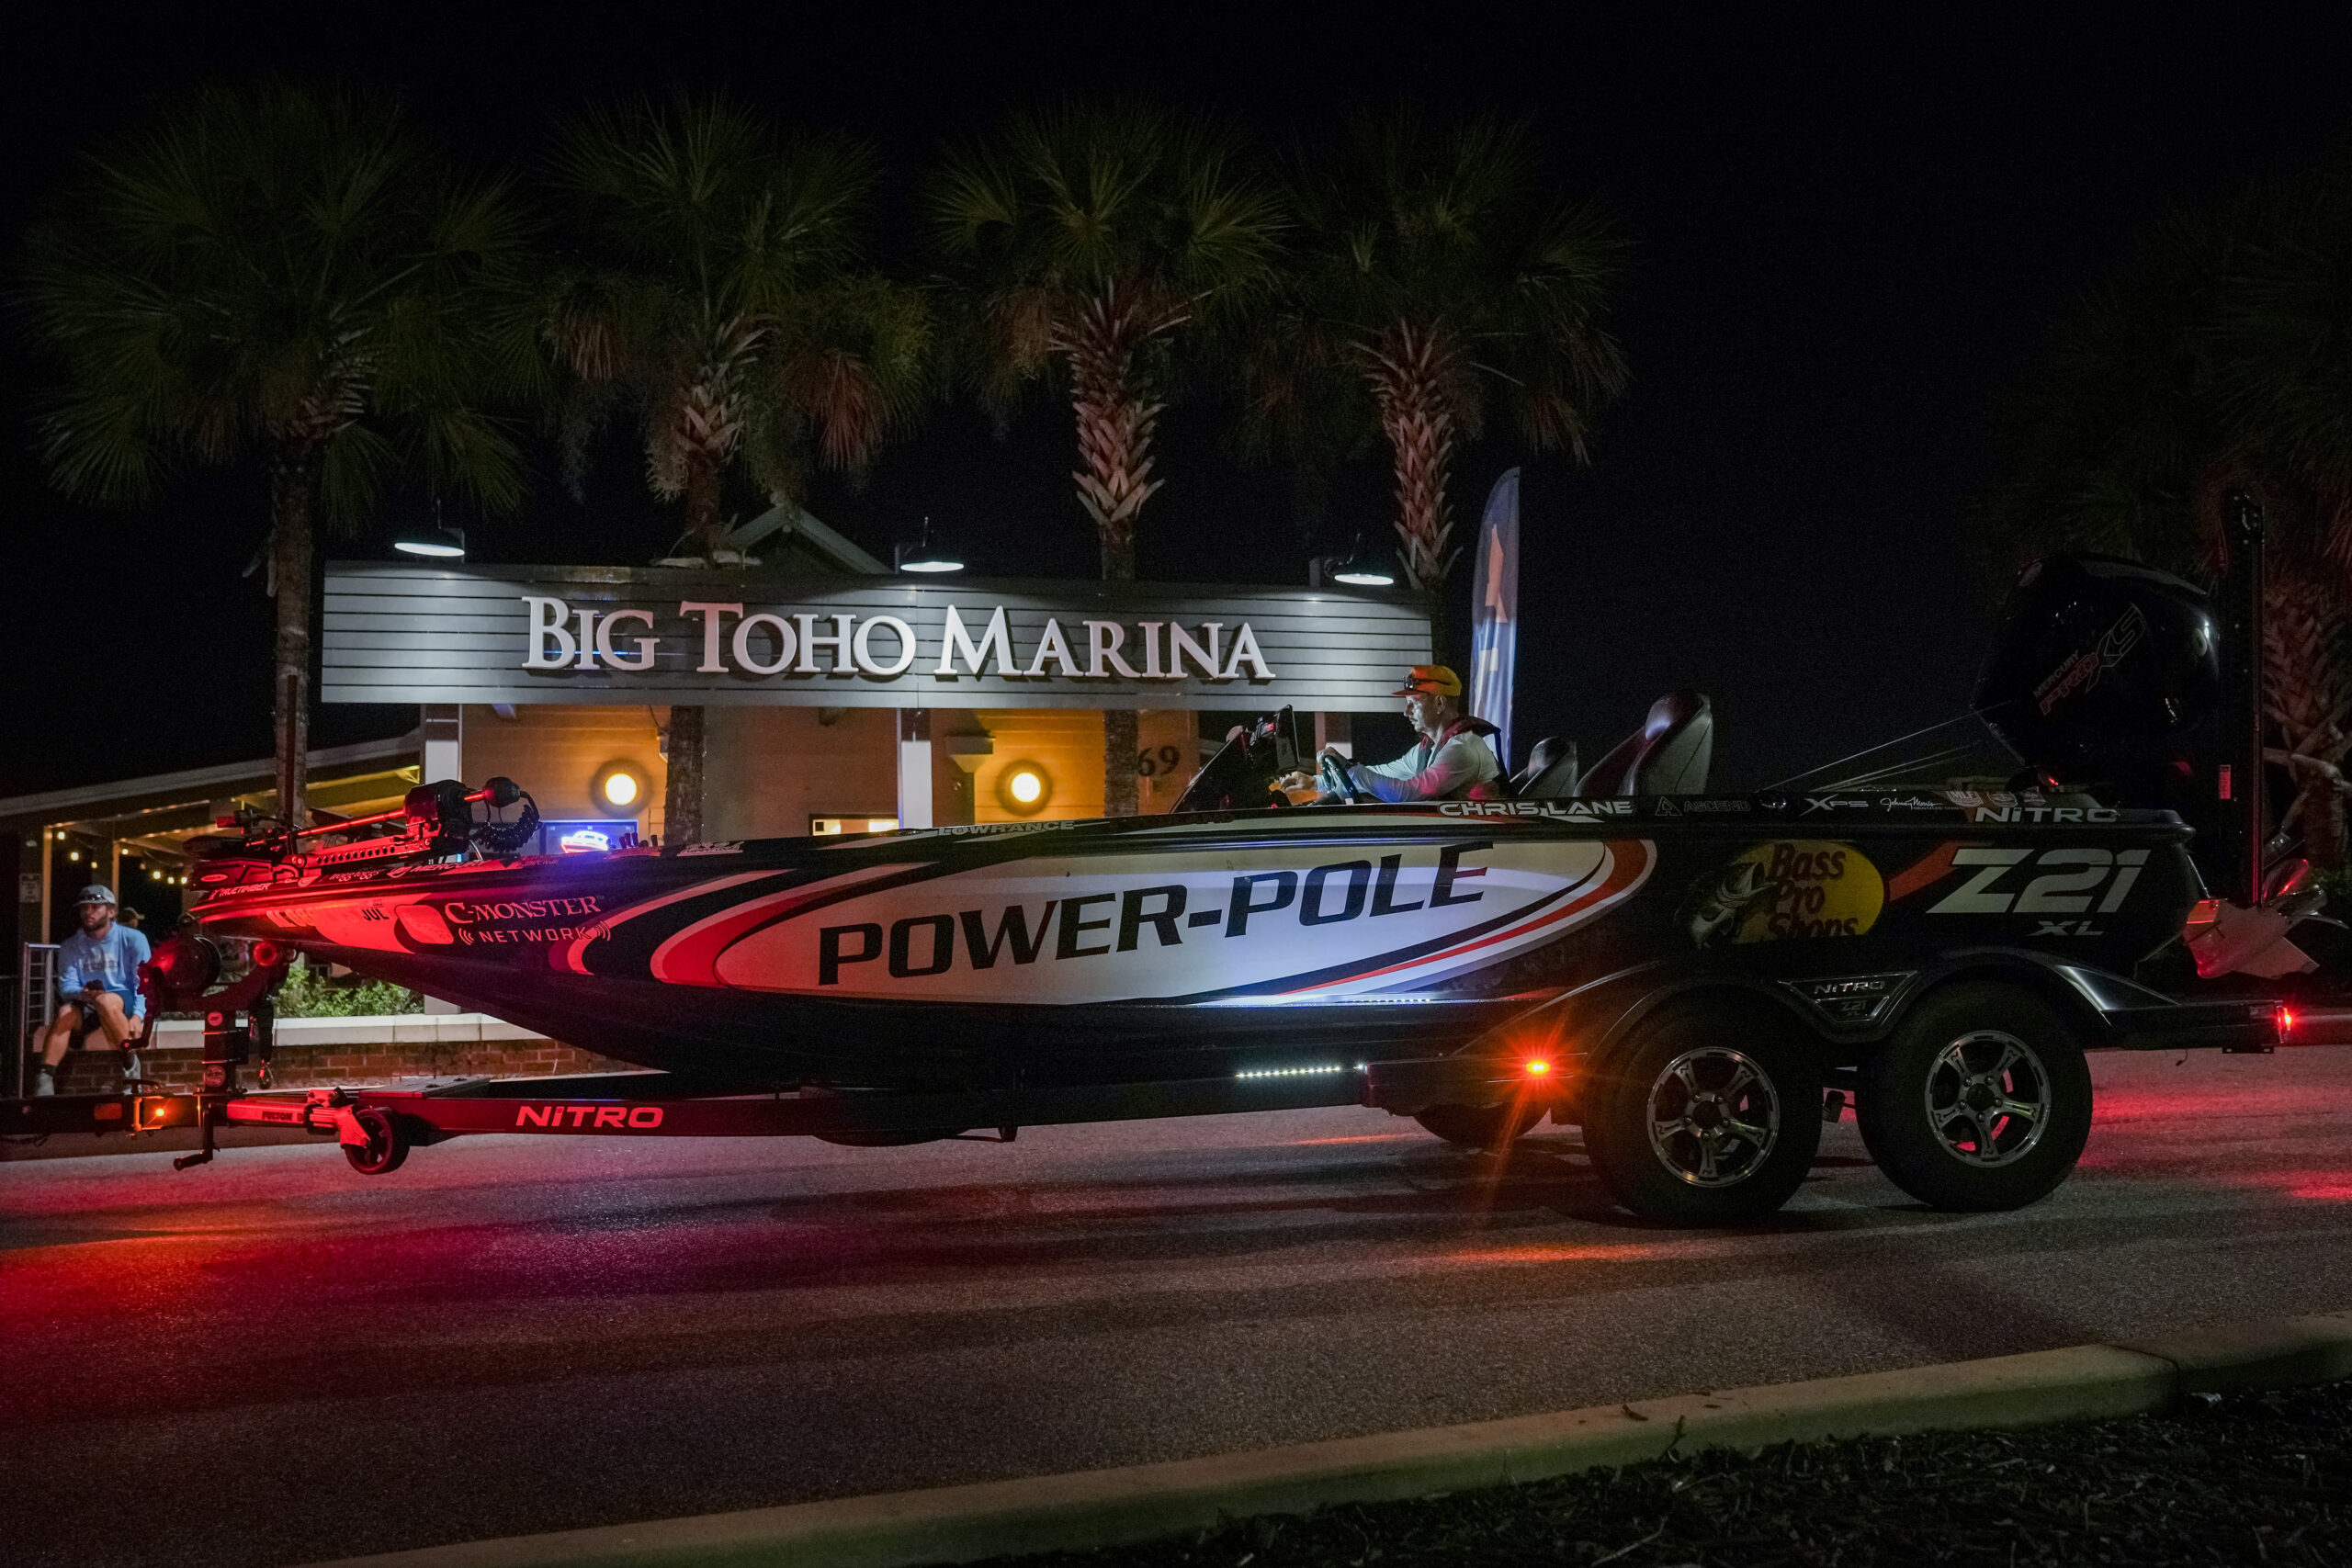 GALLERY: ICAST Cup starts in Florida - Major League Fishing